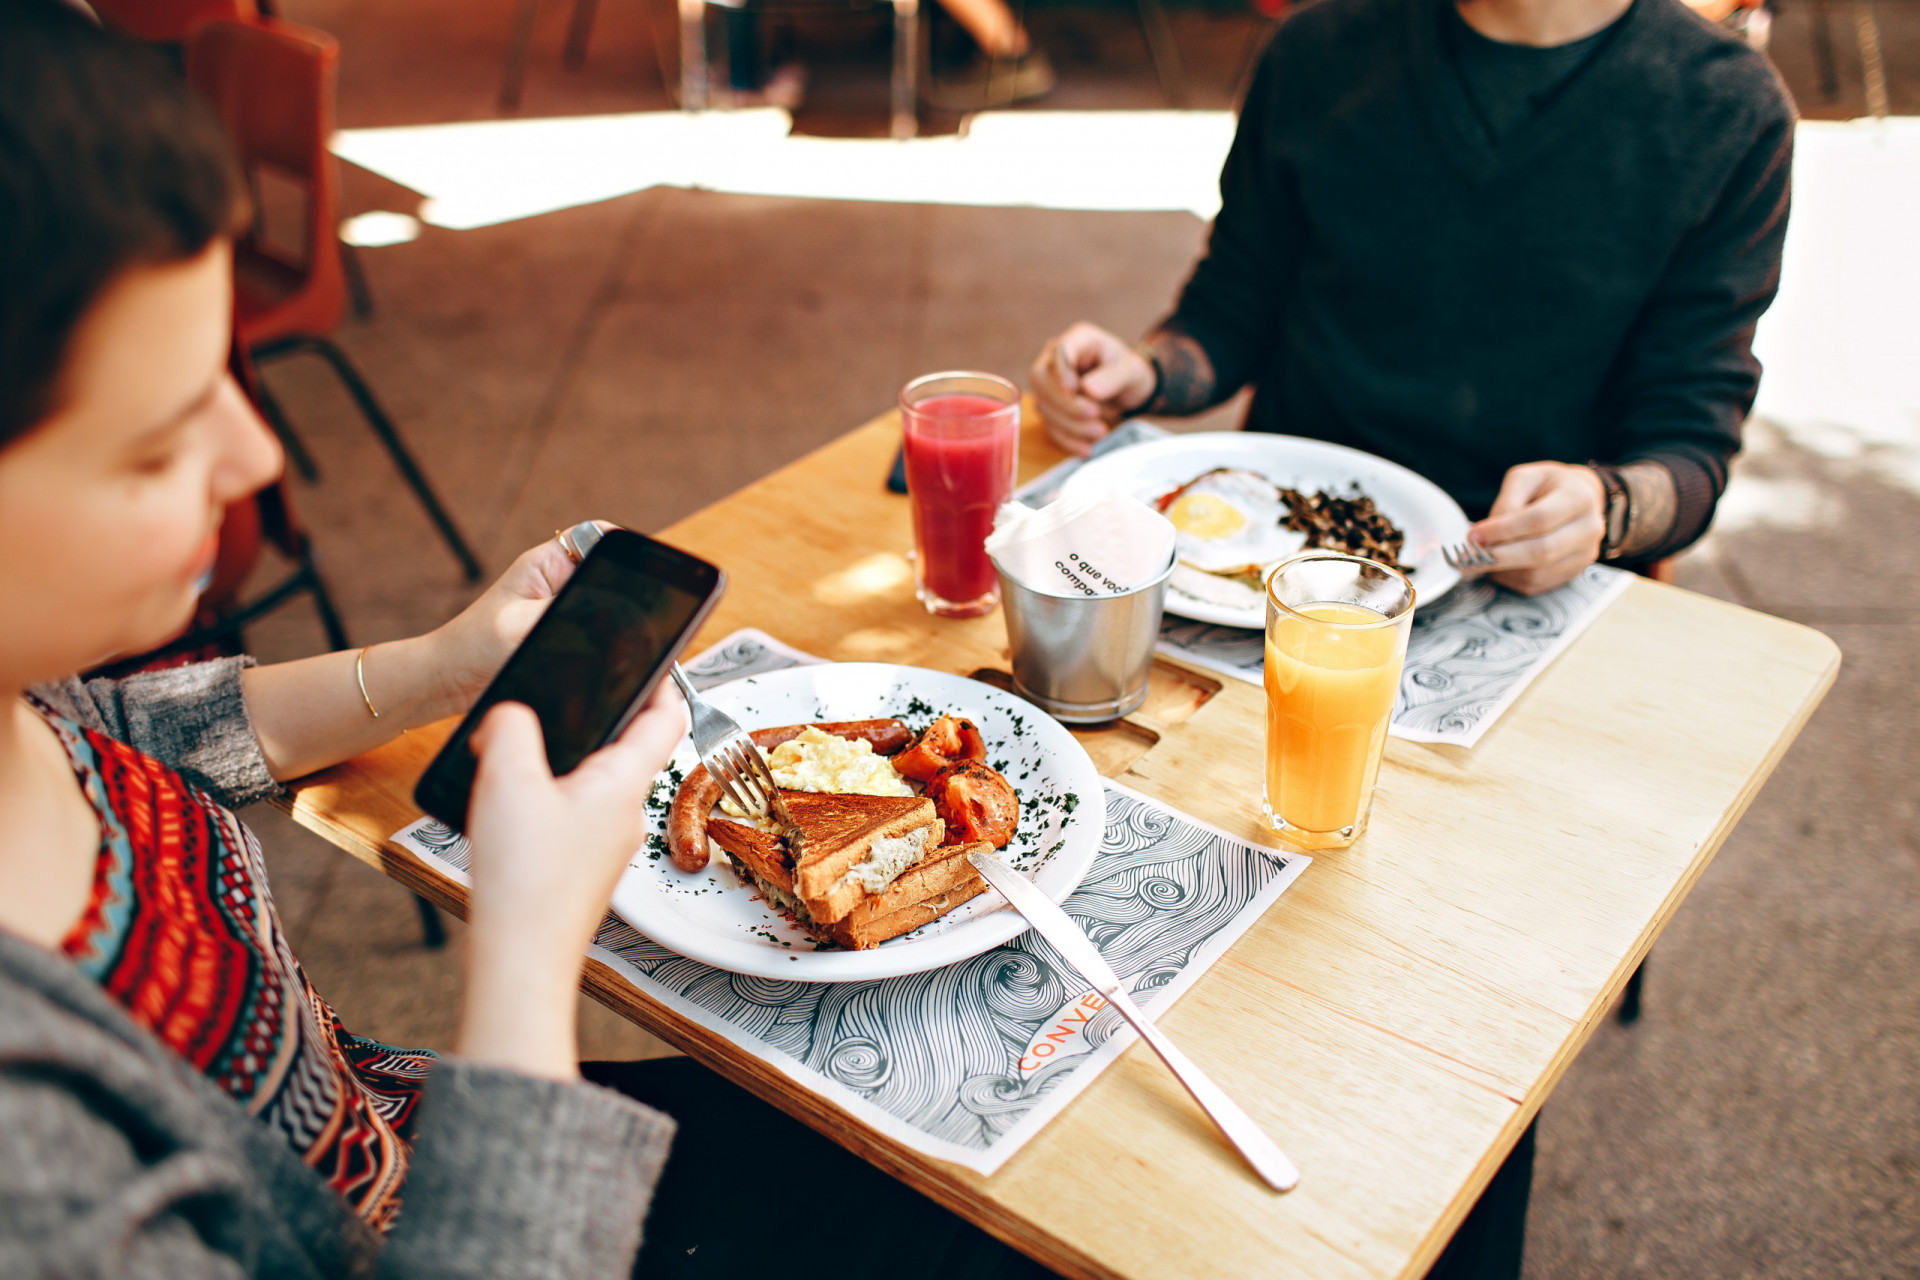 People using mobile devices while eating- utilizing customer feedback is a great restaurant marketing idea.